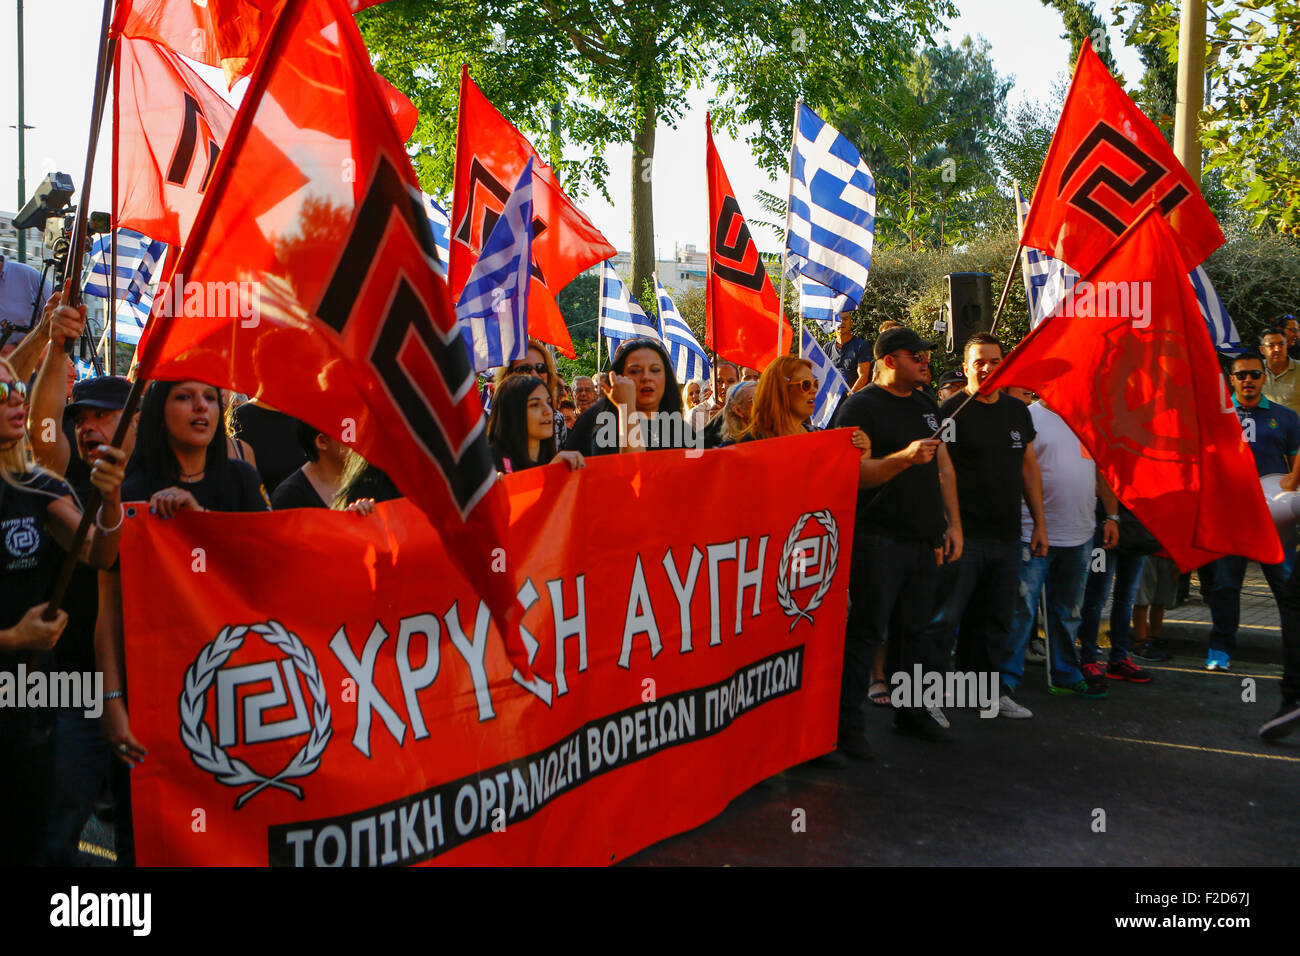 Athens, Greece. 16th Sep, 2015. Golden Dawn supporters carries a banner and Golden Dawn and Greek flags at the election rally in Athens. Greek right wing party Golden Dawn held an election rally in Athens, four days ahead of election day. The party hopes to gain enough seats in the election to become the third latest party in the Greek Parliament. Credit:  Michael Debets/Pacific Press/Alamy Live News Stock Photo